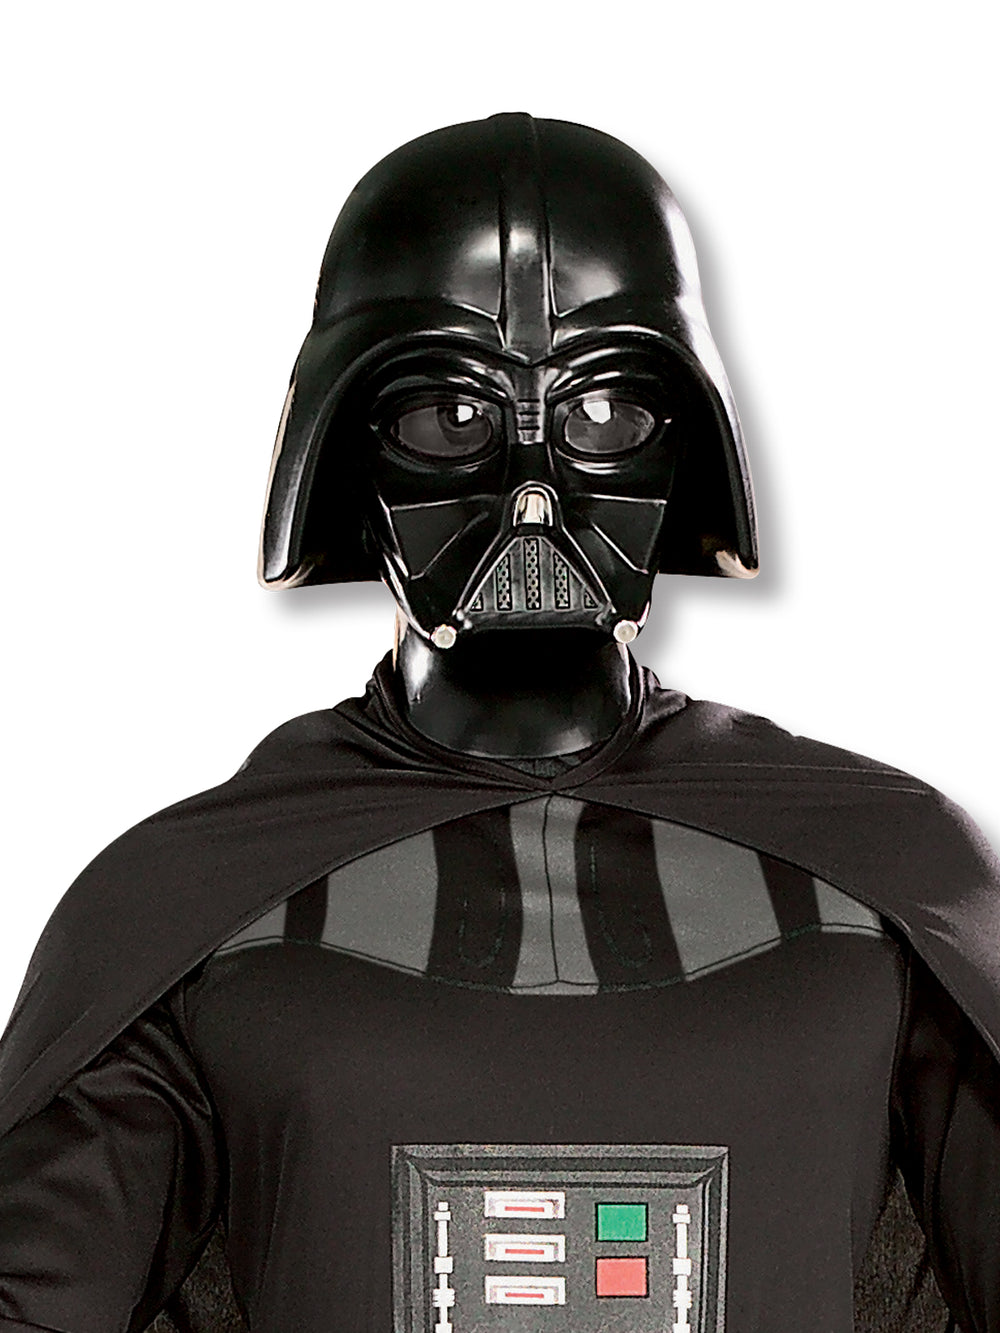 DARTH VADER PLUS COSTUME, ADULT - Little Shop of Horrors